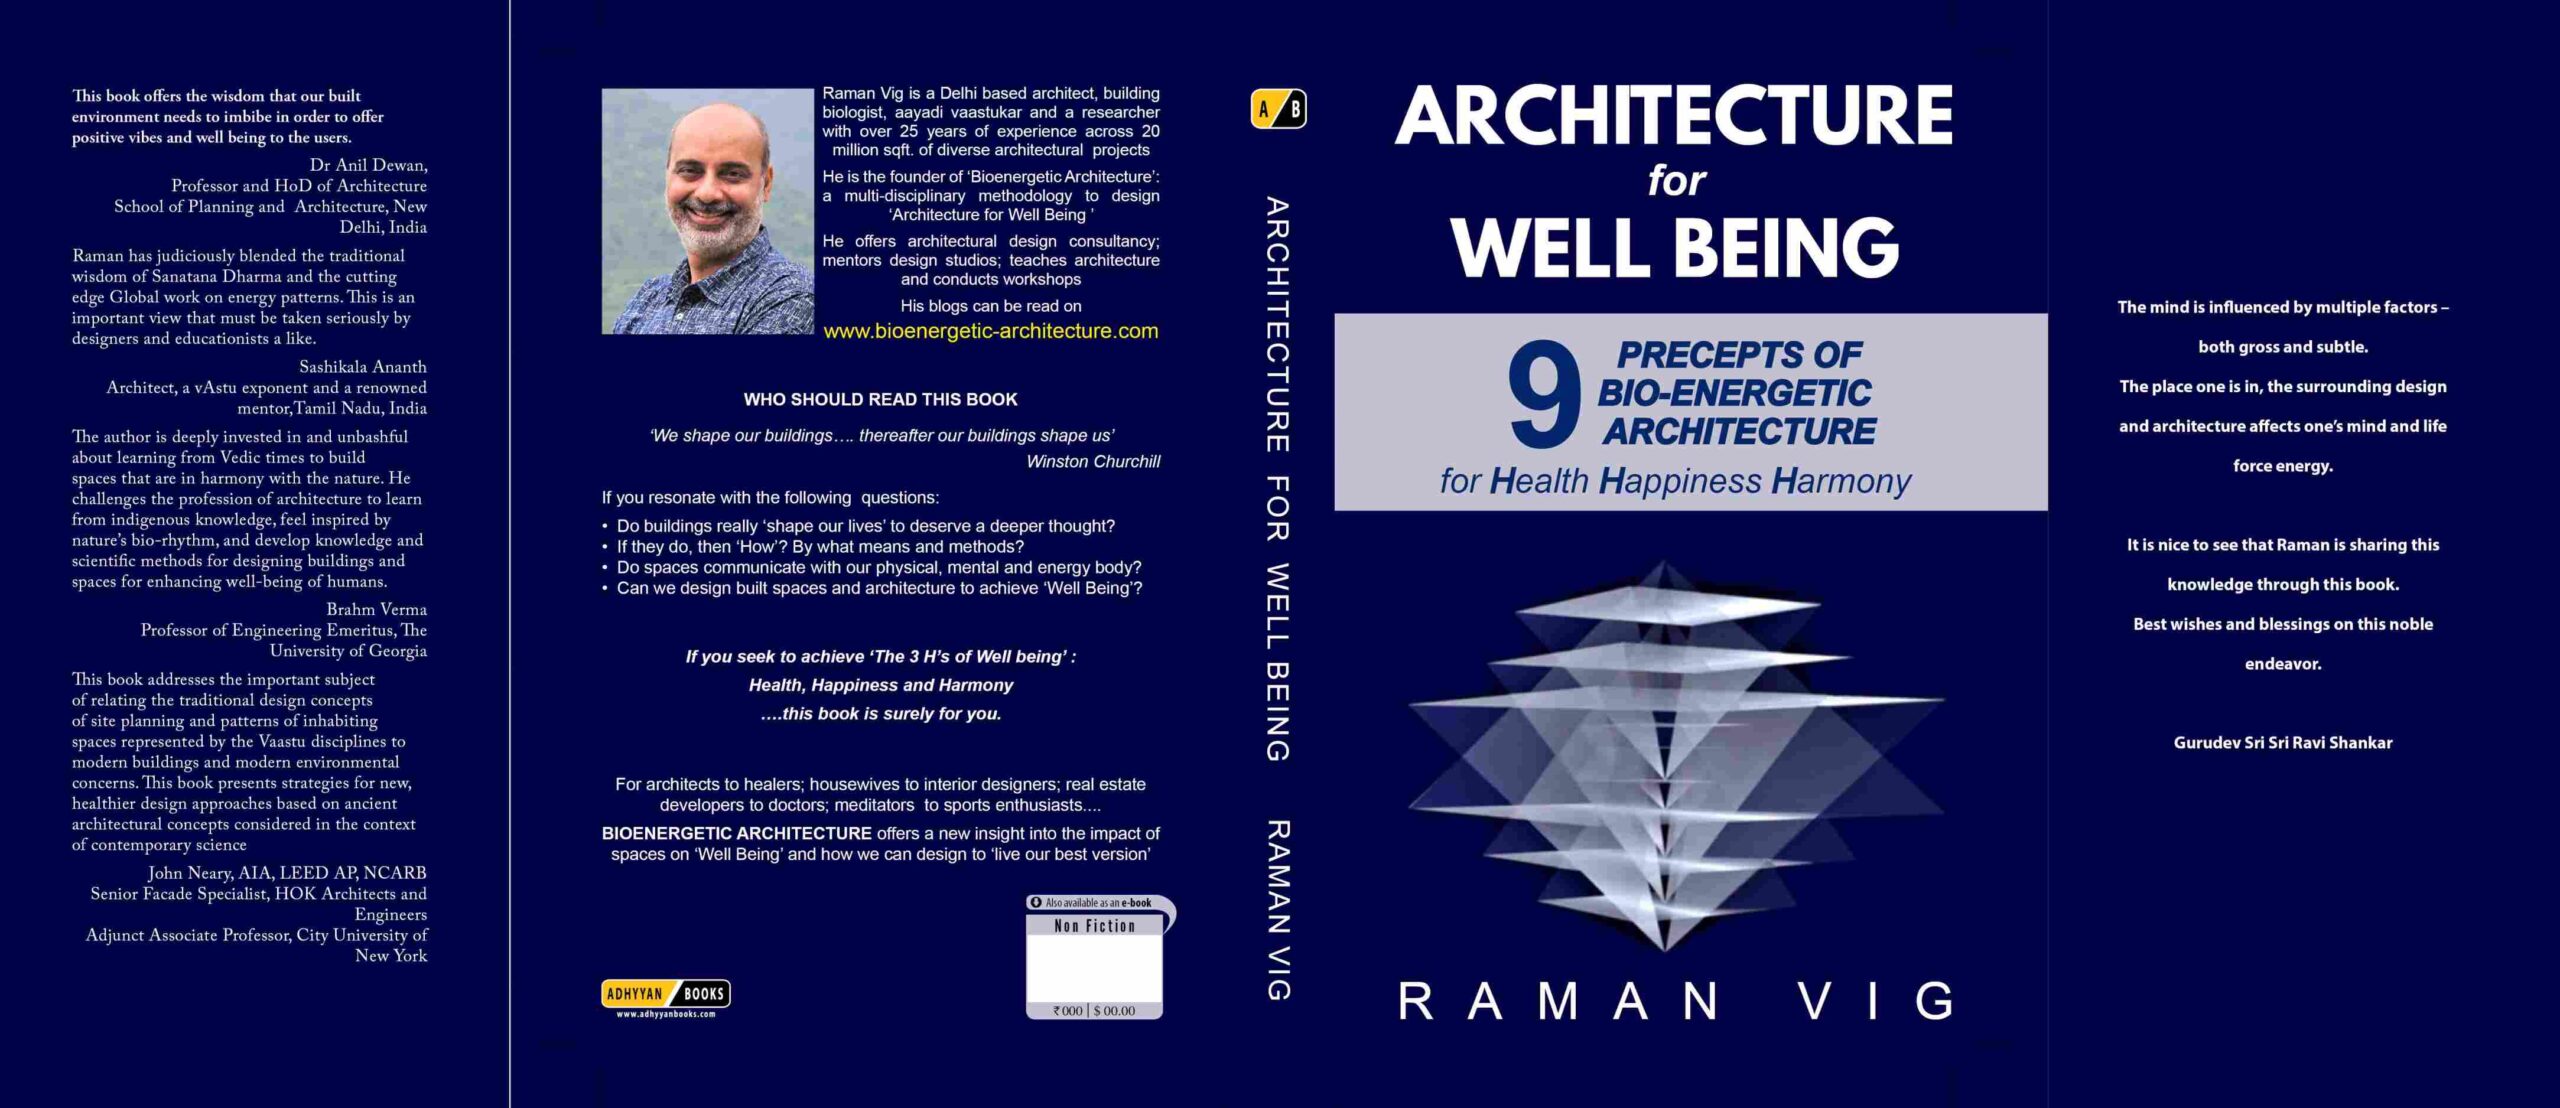 Book: ARCHITECTURE for WELL BEING, By Raman vig 1